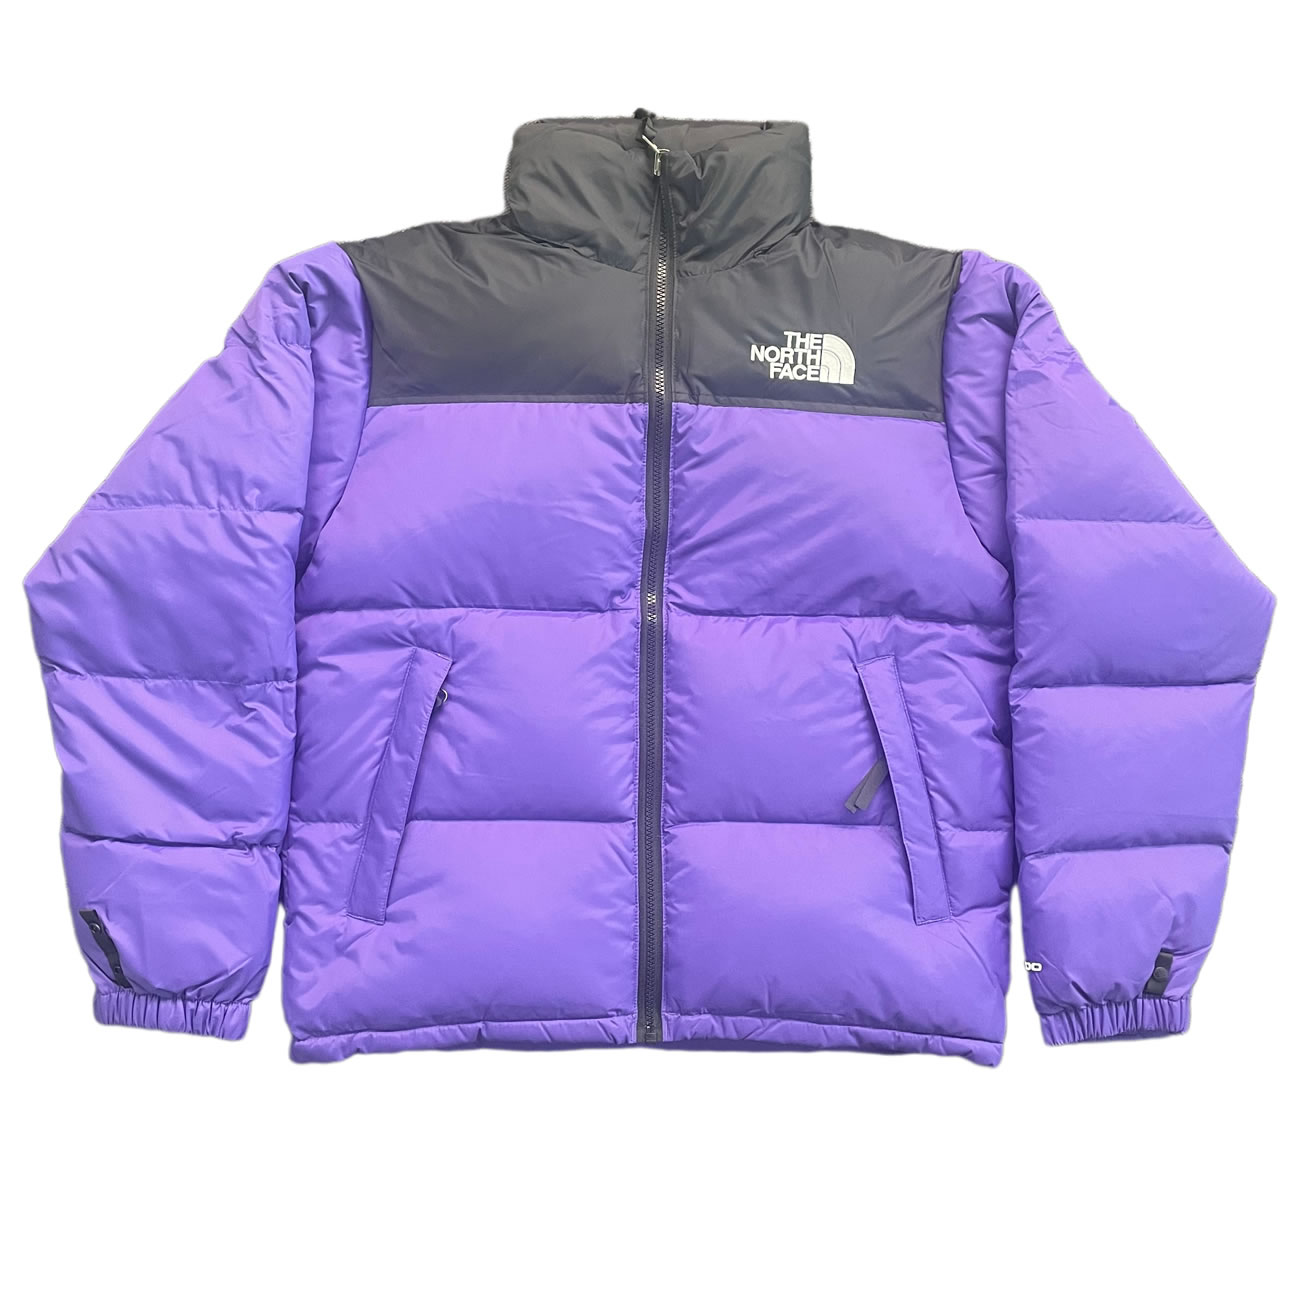 The North Face 1996 Retro Nuptse Packable Jacket Fw21 (6) - newkick.org